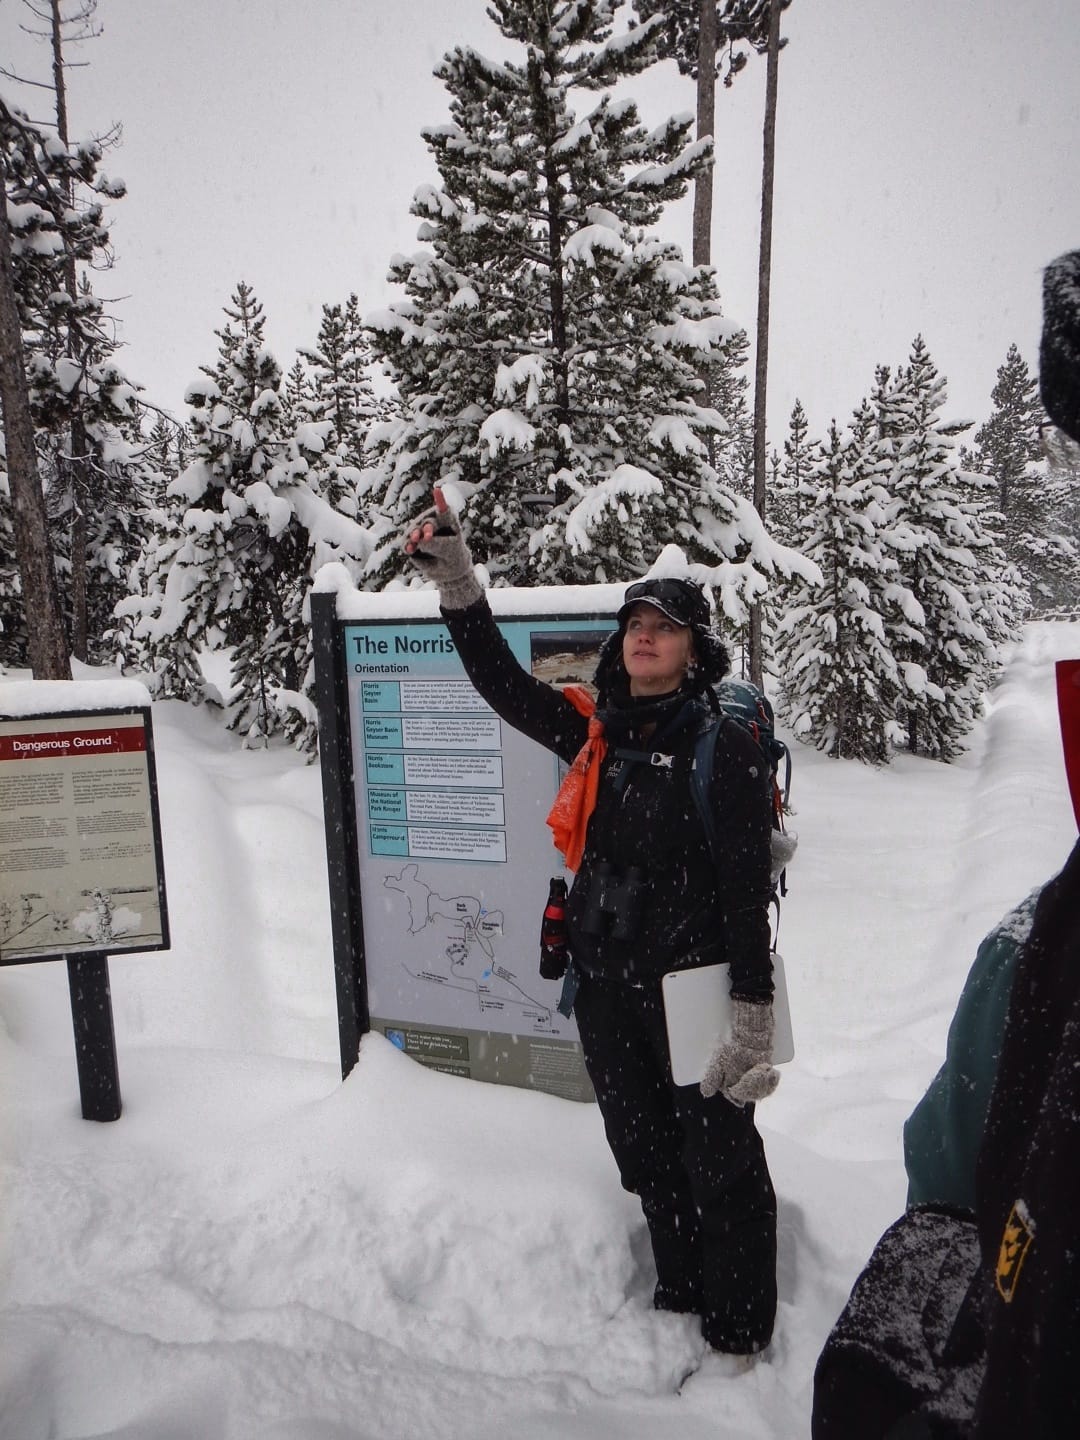 Photo by Author — Amy demonstrating where snow comes from (note the bear spray!)